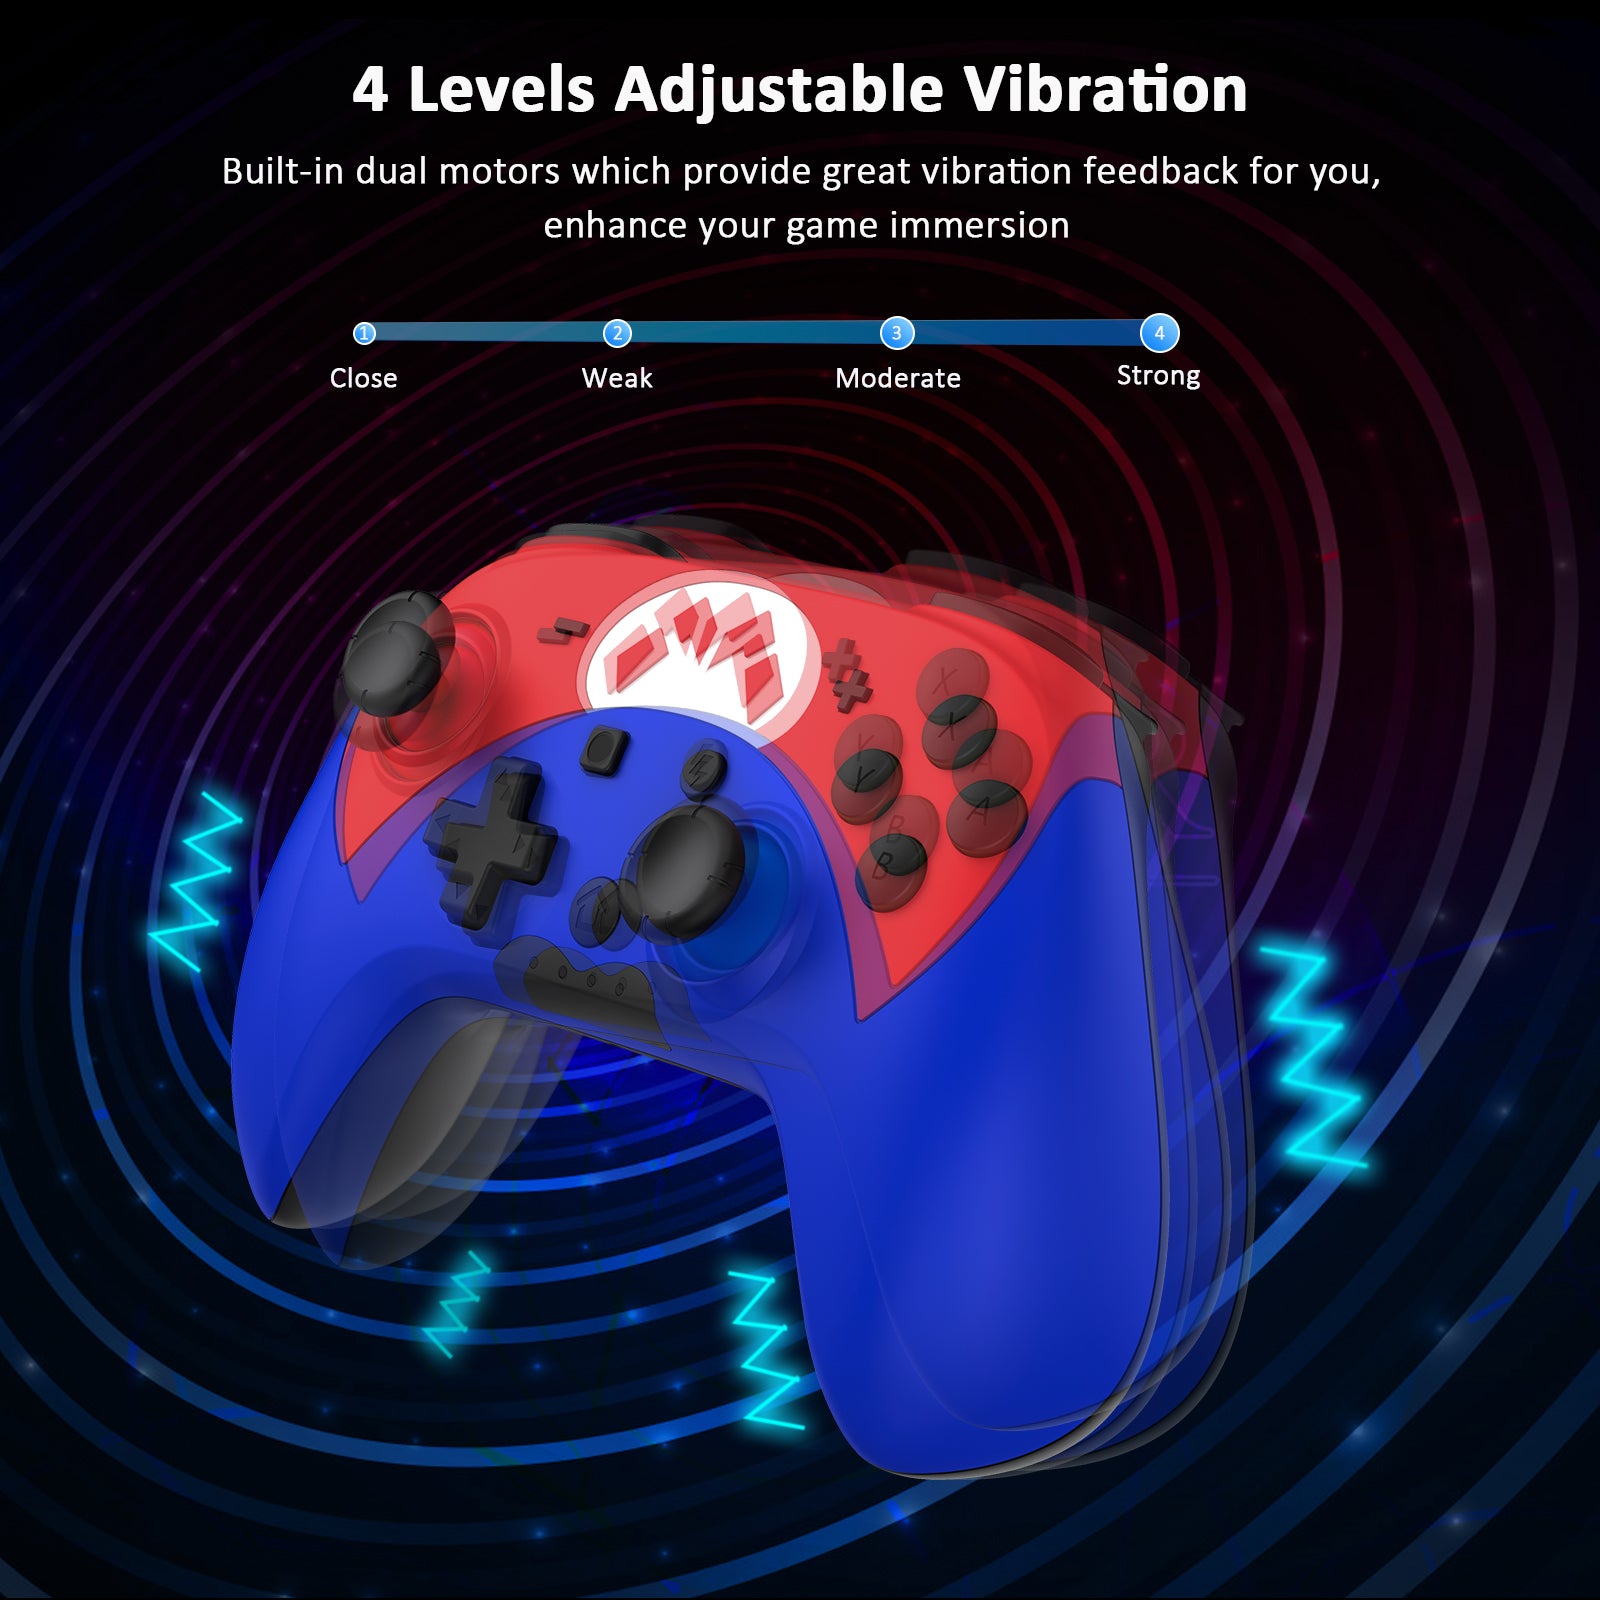 4 adjustable vibration levels: Off, Low, Medium, and High.